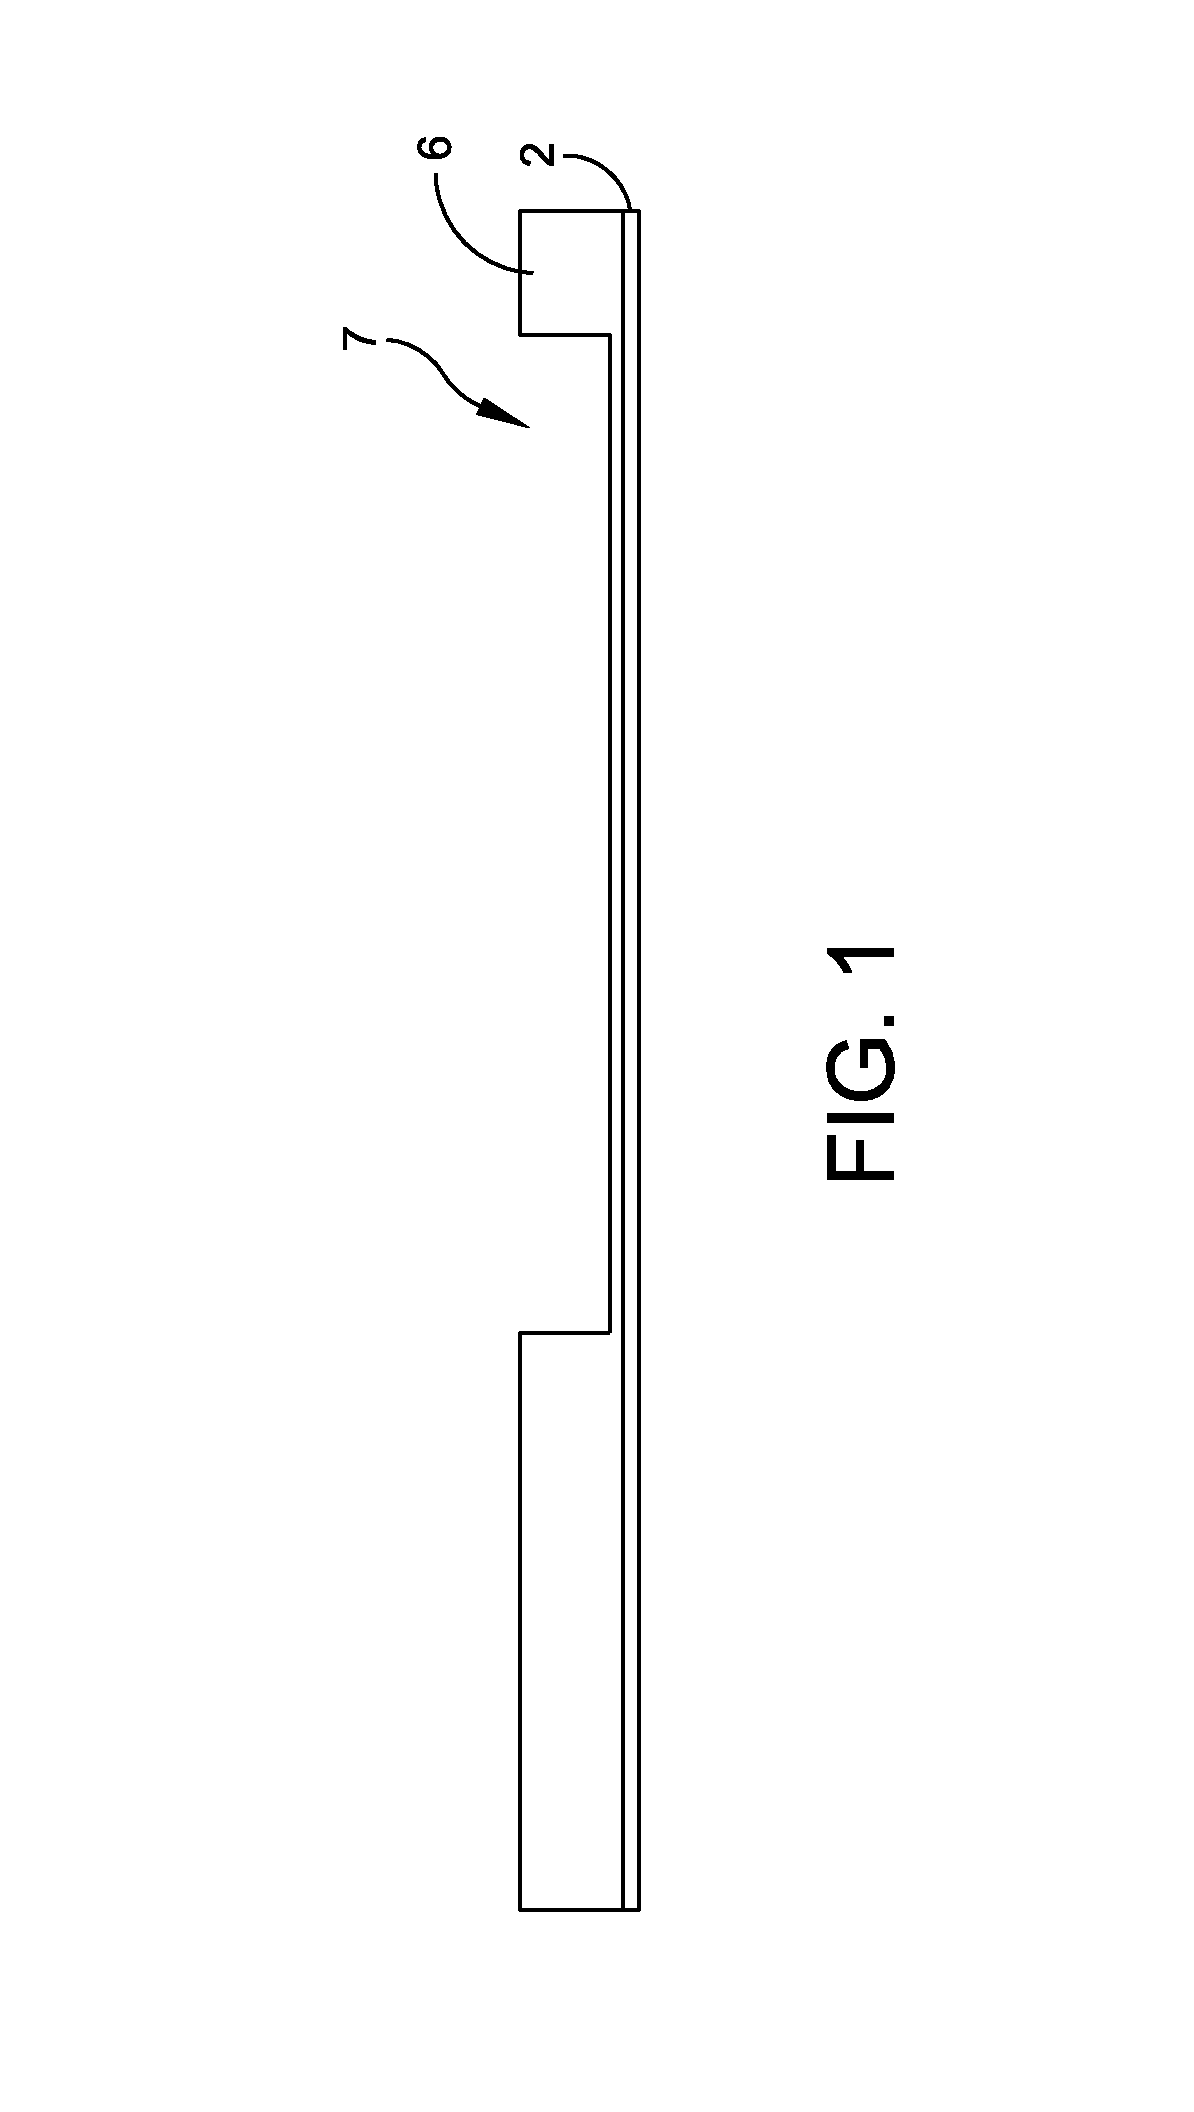 Apparatus and method for making information carrying cards through radiation curing, and resulting products